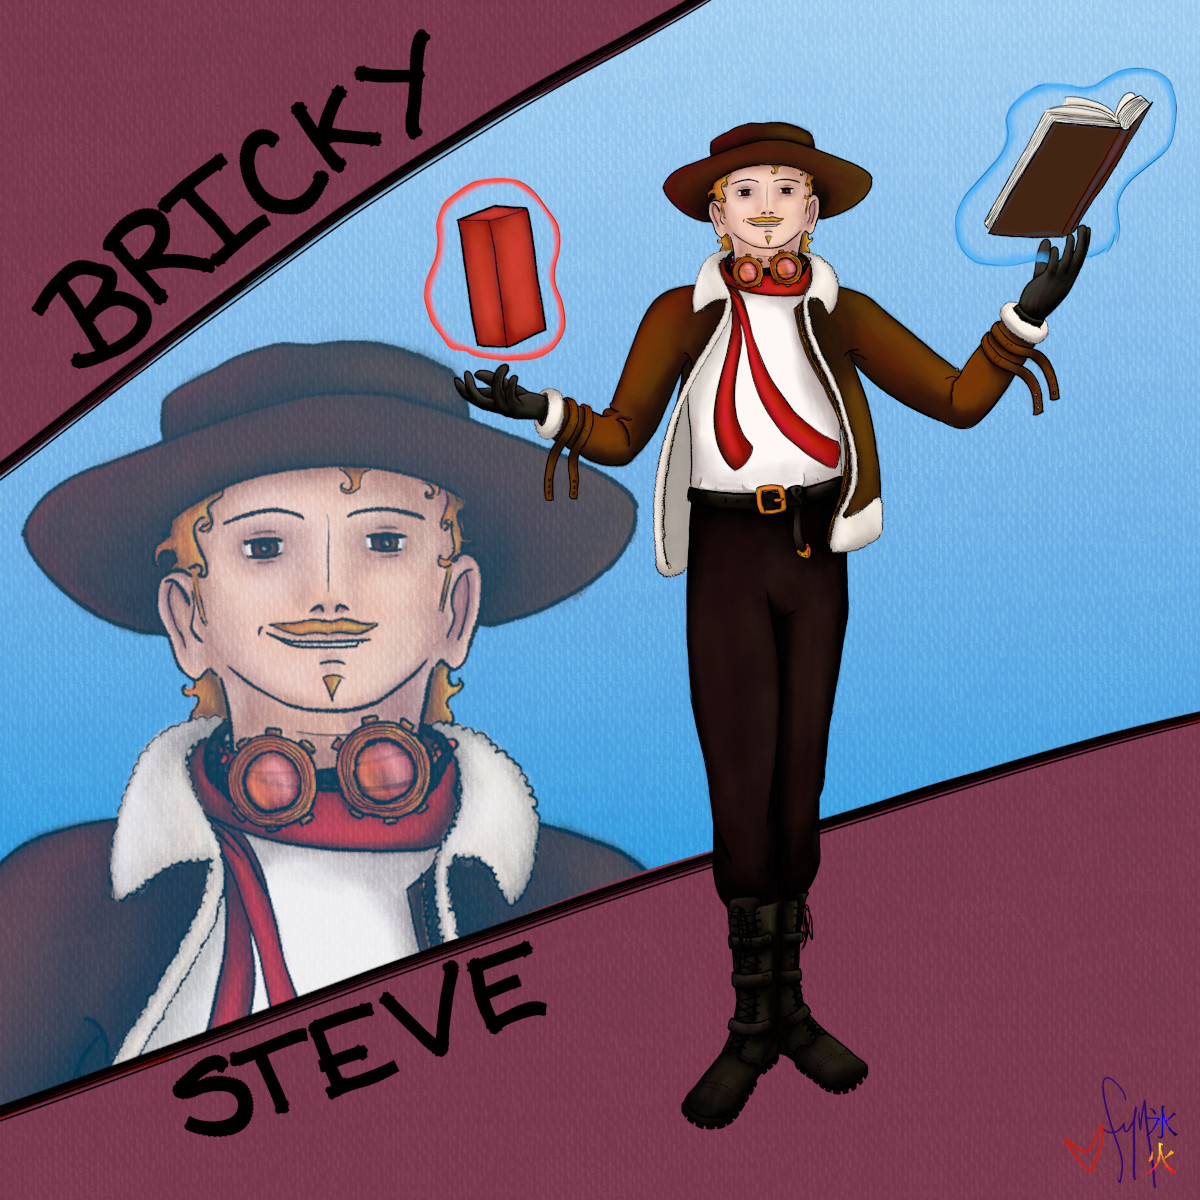 Bricky Steve - World of Darkness player character